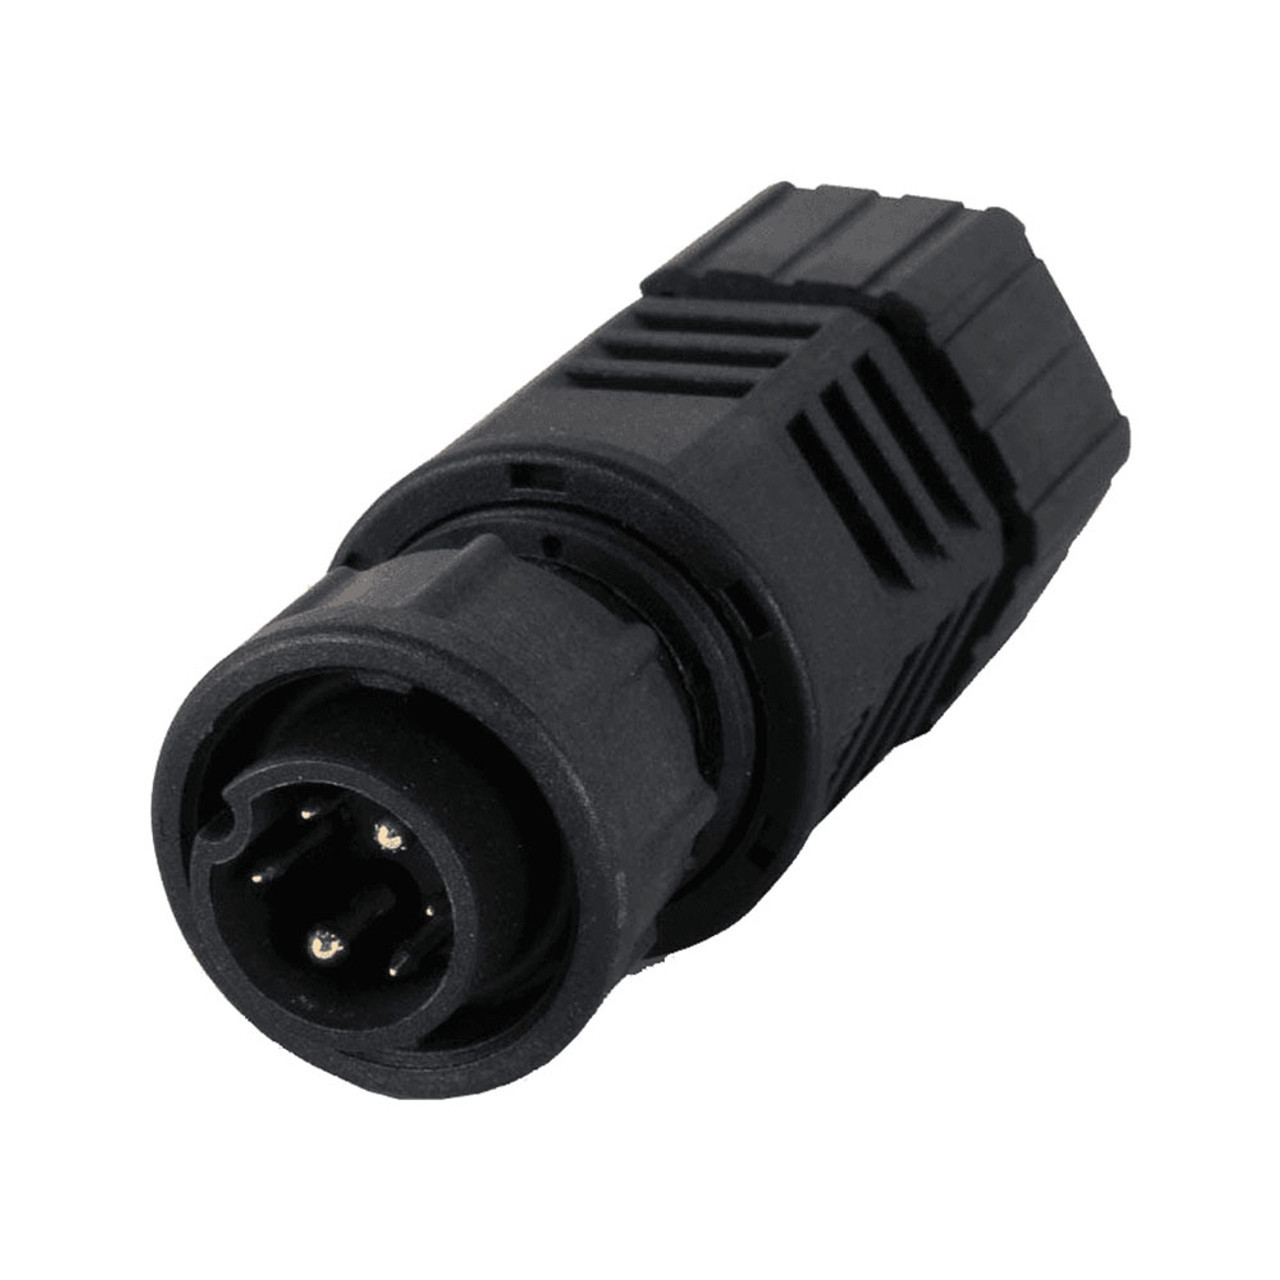 Martin Lighting Power + Data Connector Bbd Male (91611750)